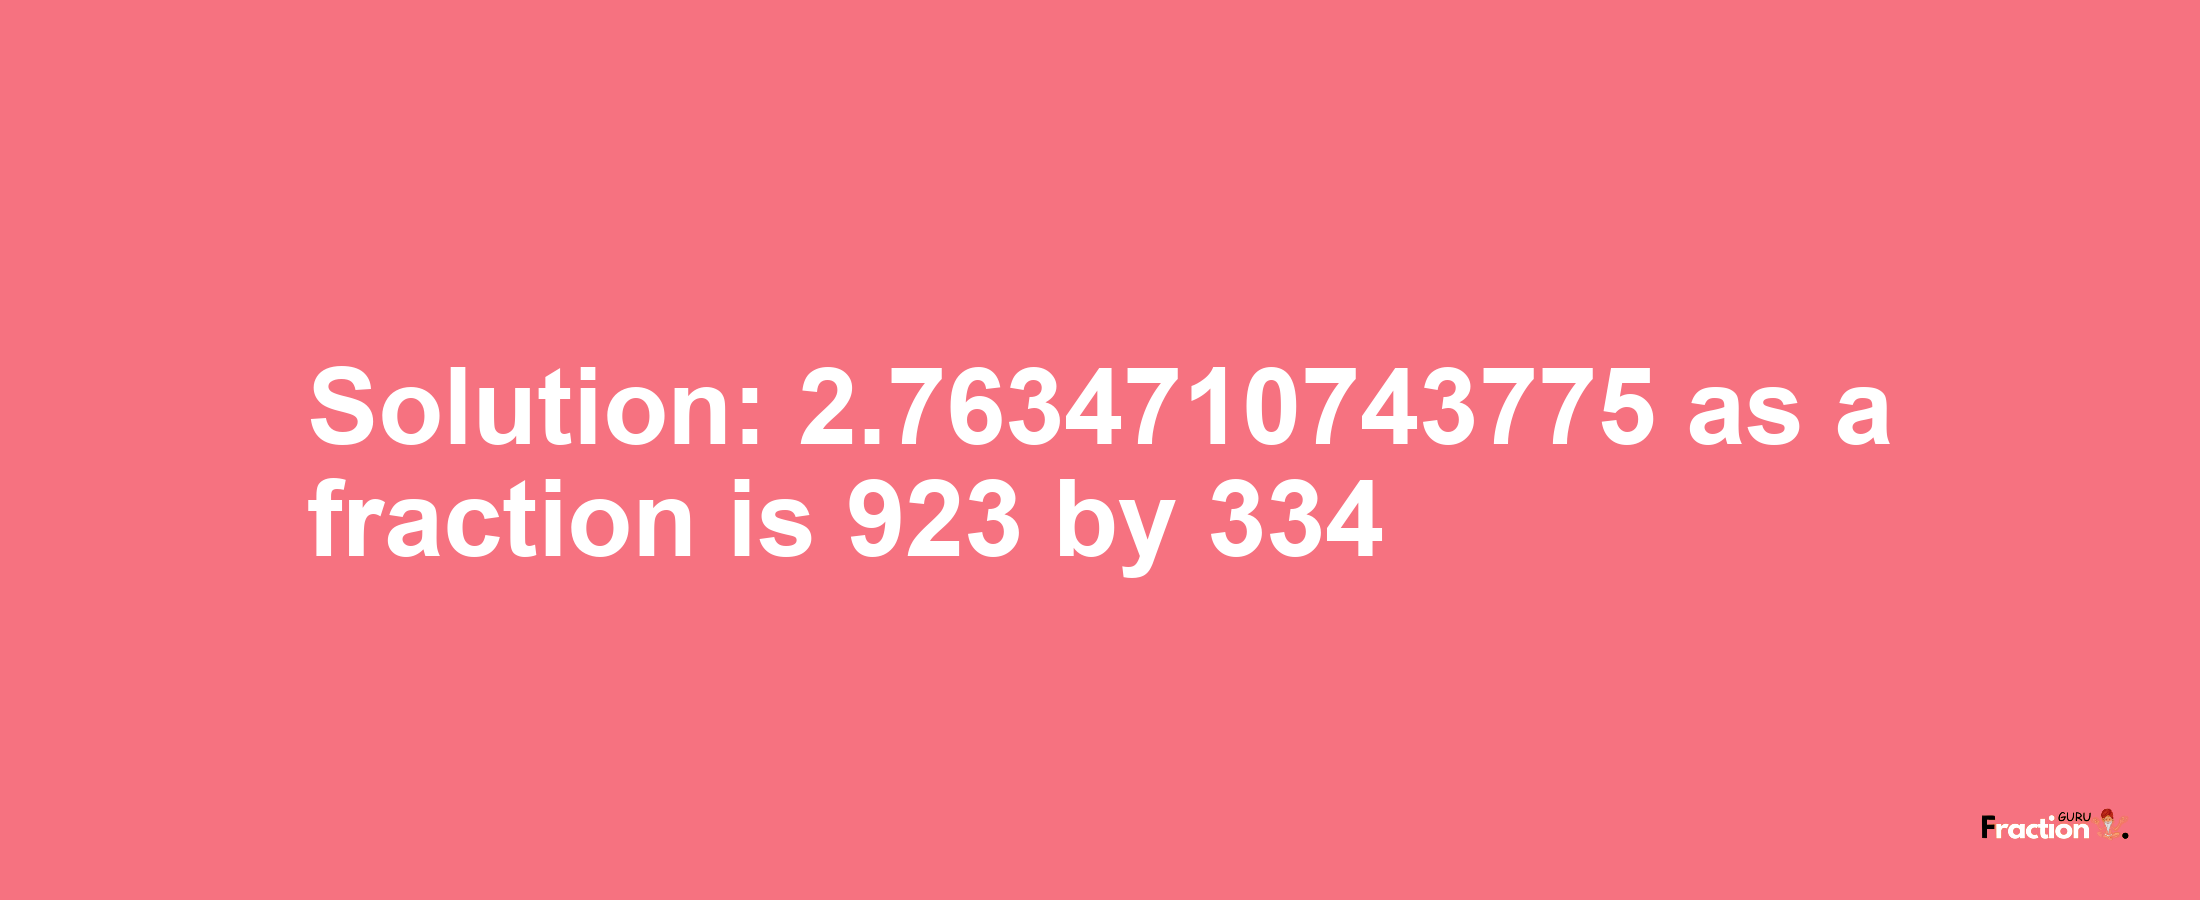 Solution:2.7634710743775 as a fraction is 923/334